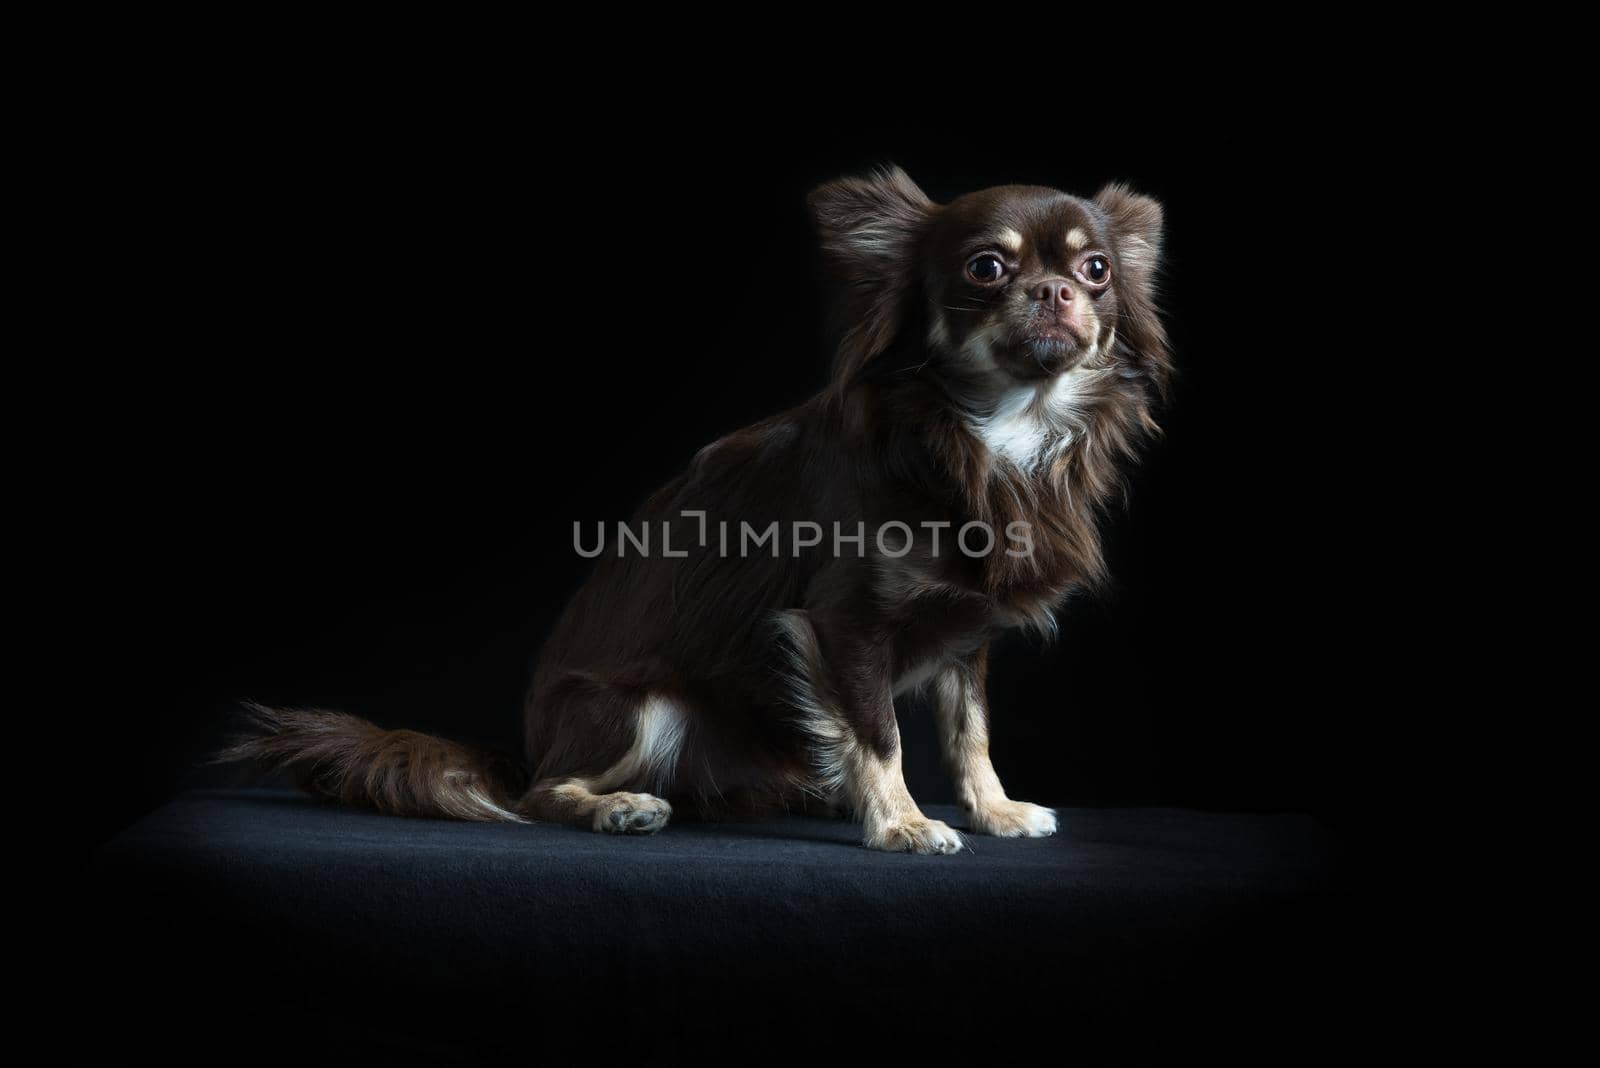 Male long-haired Chihuahua in black background by LeoniekvanderVliet